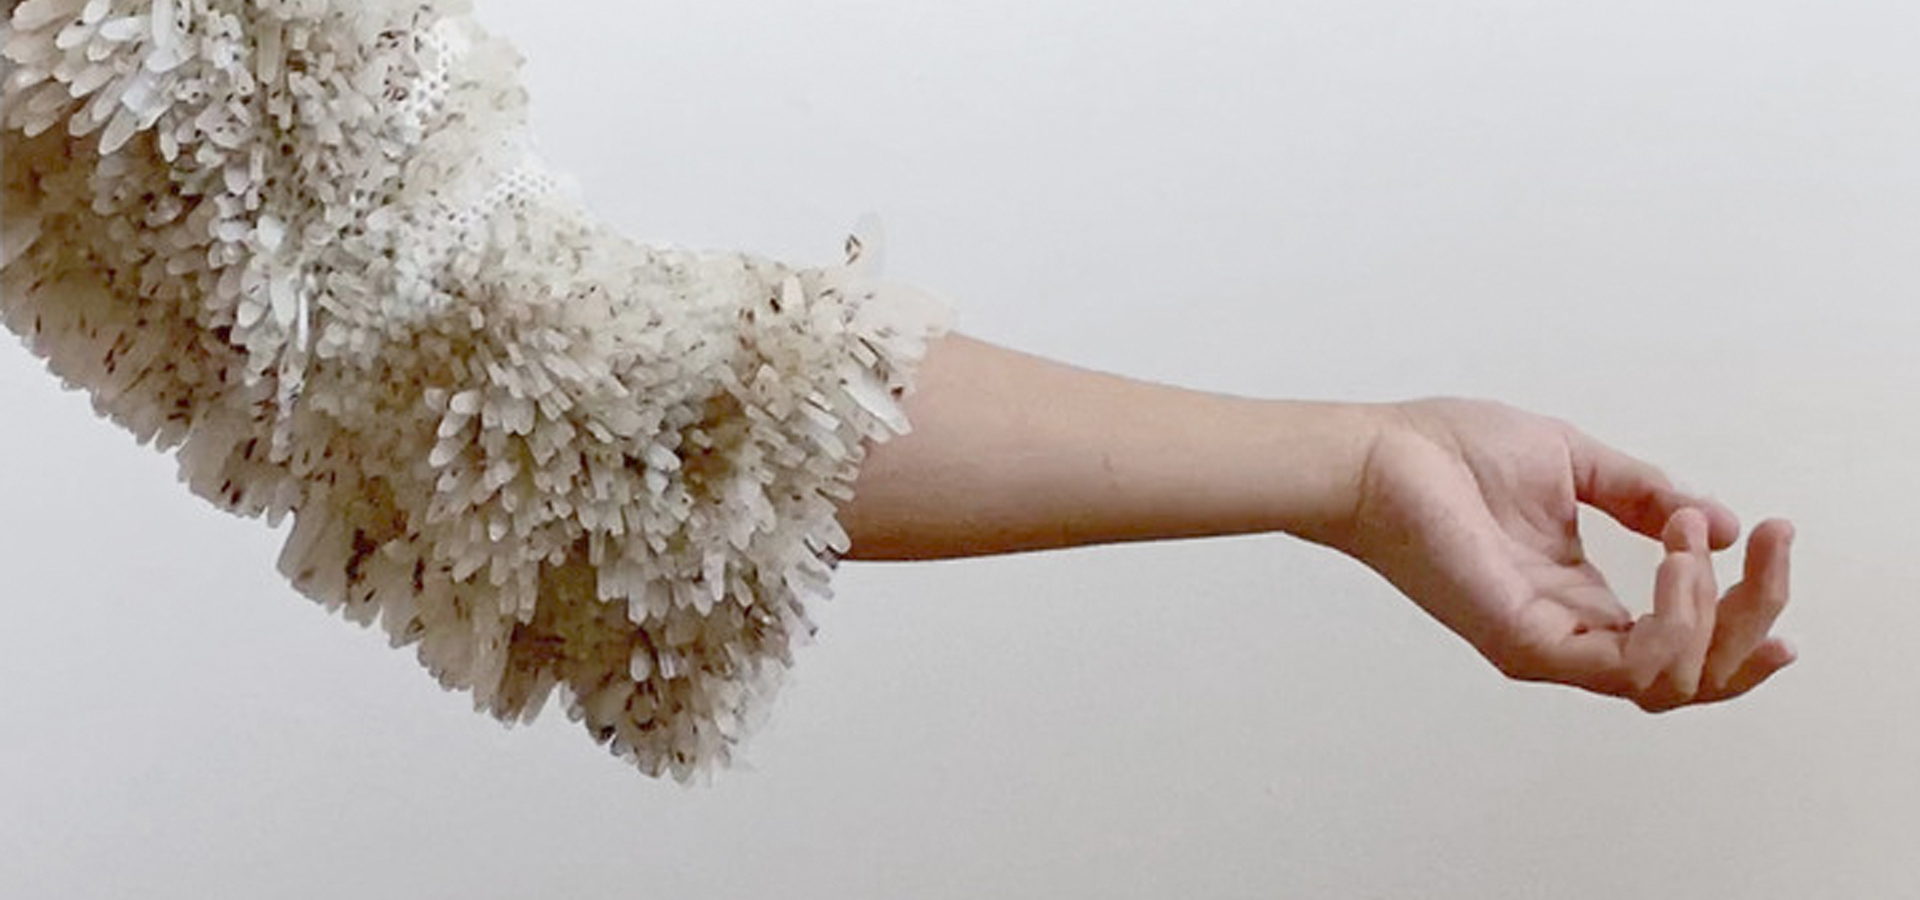 A person's arm, who is wearing a hydroponic garment that is sprouting seeds.